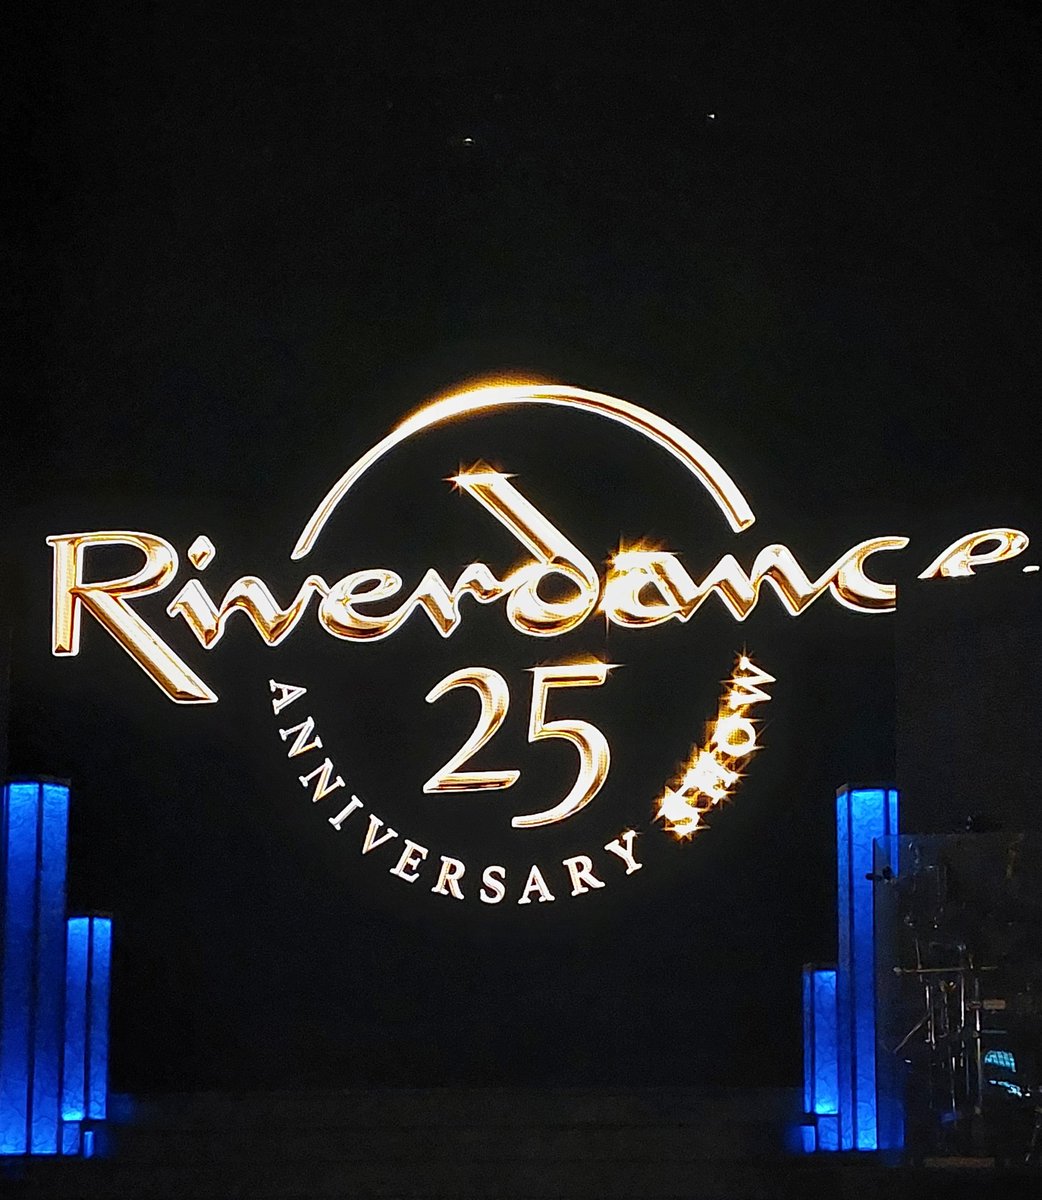 #Riverdance #GaeityTheatre #25Years #OpeningNight What a show! Absolutely amazing.